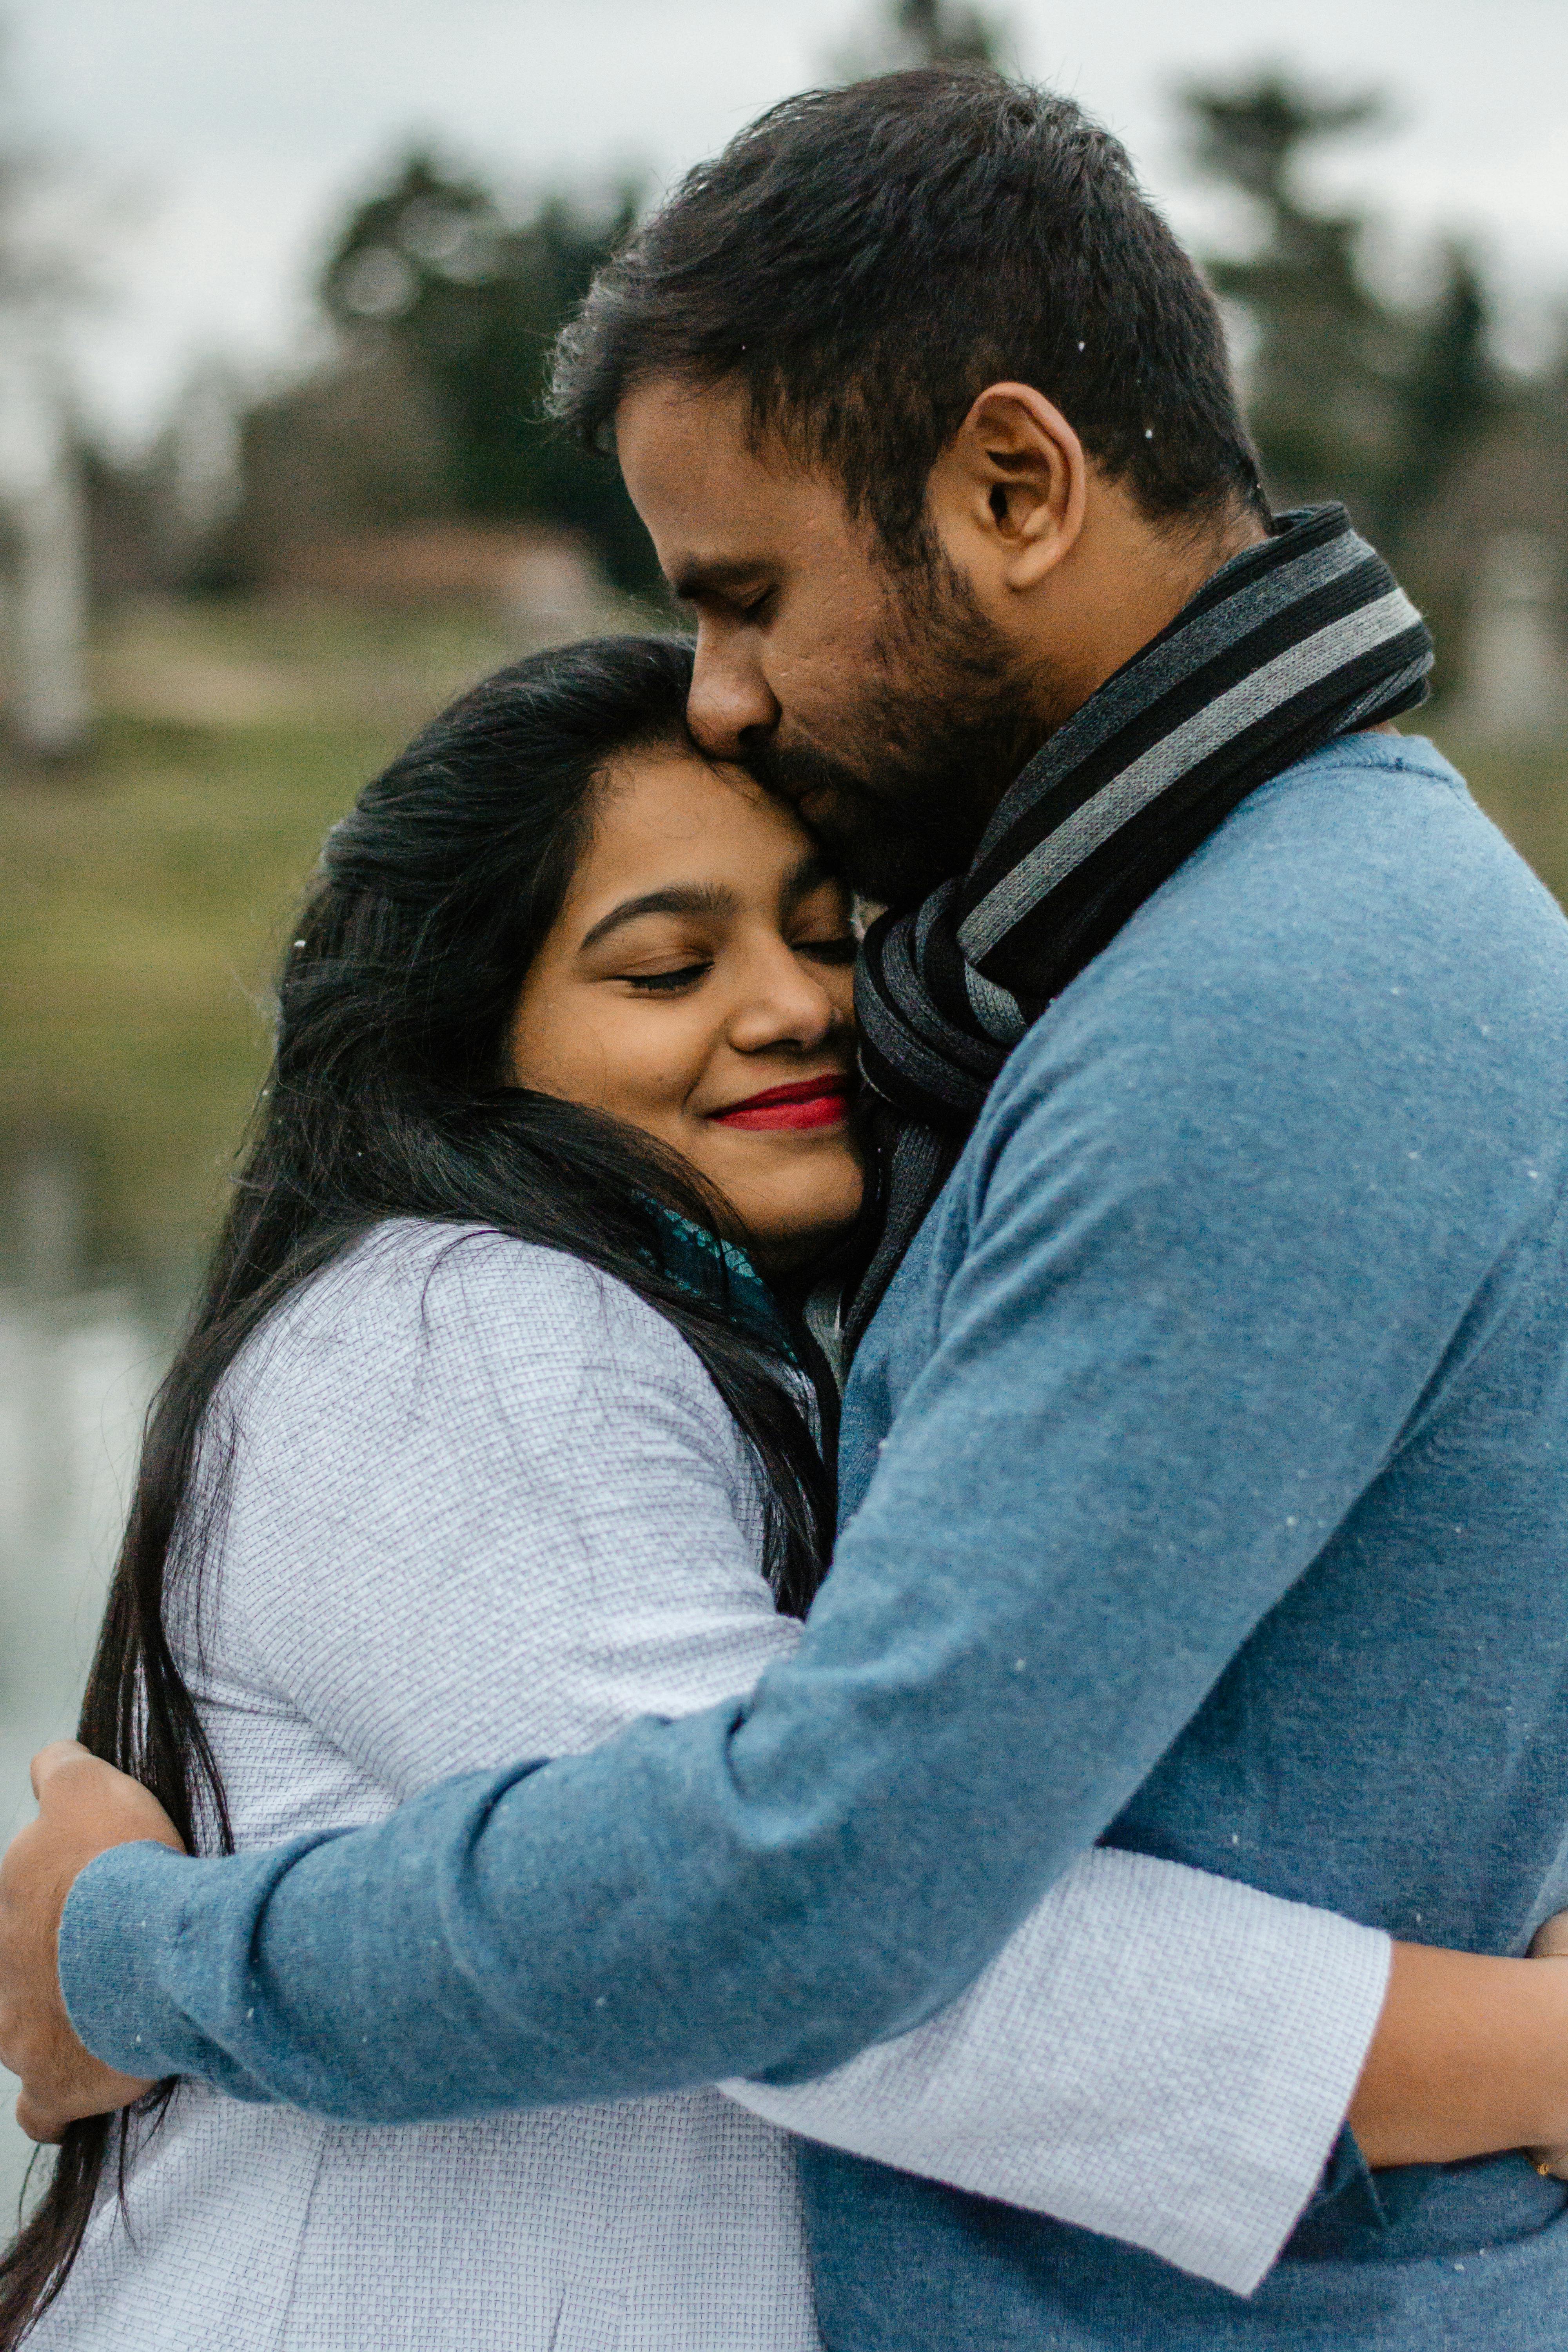 25 Engagement Photo Poses to Capture Your Love | Minted